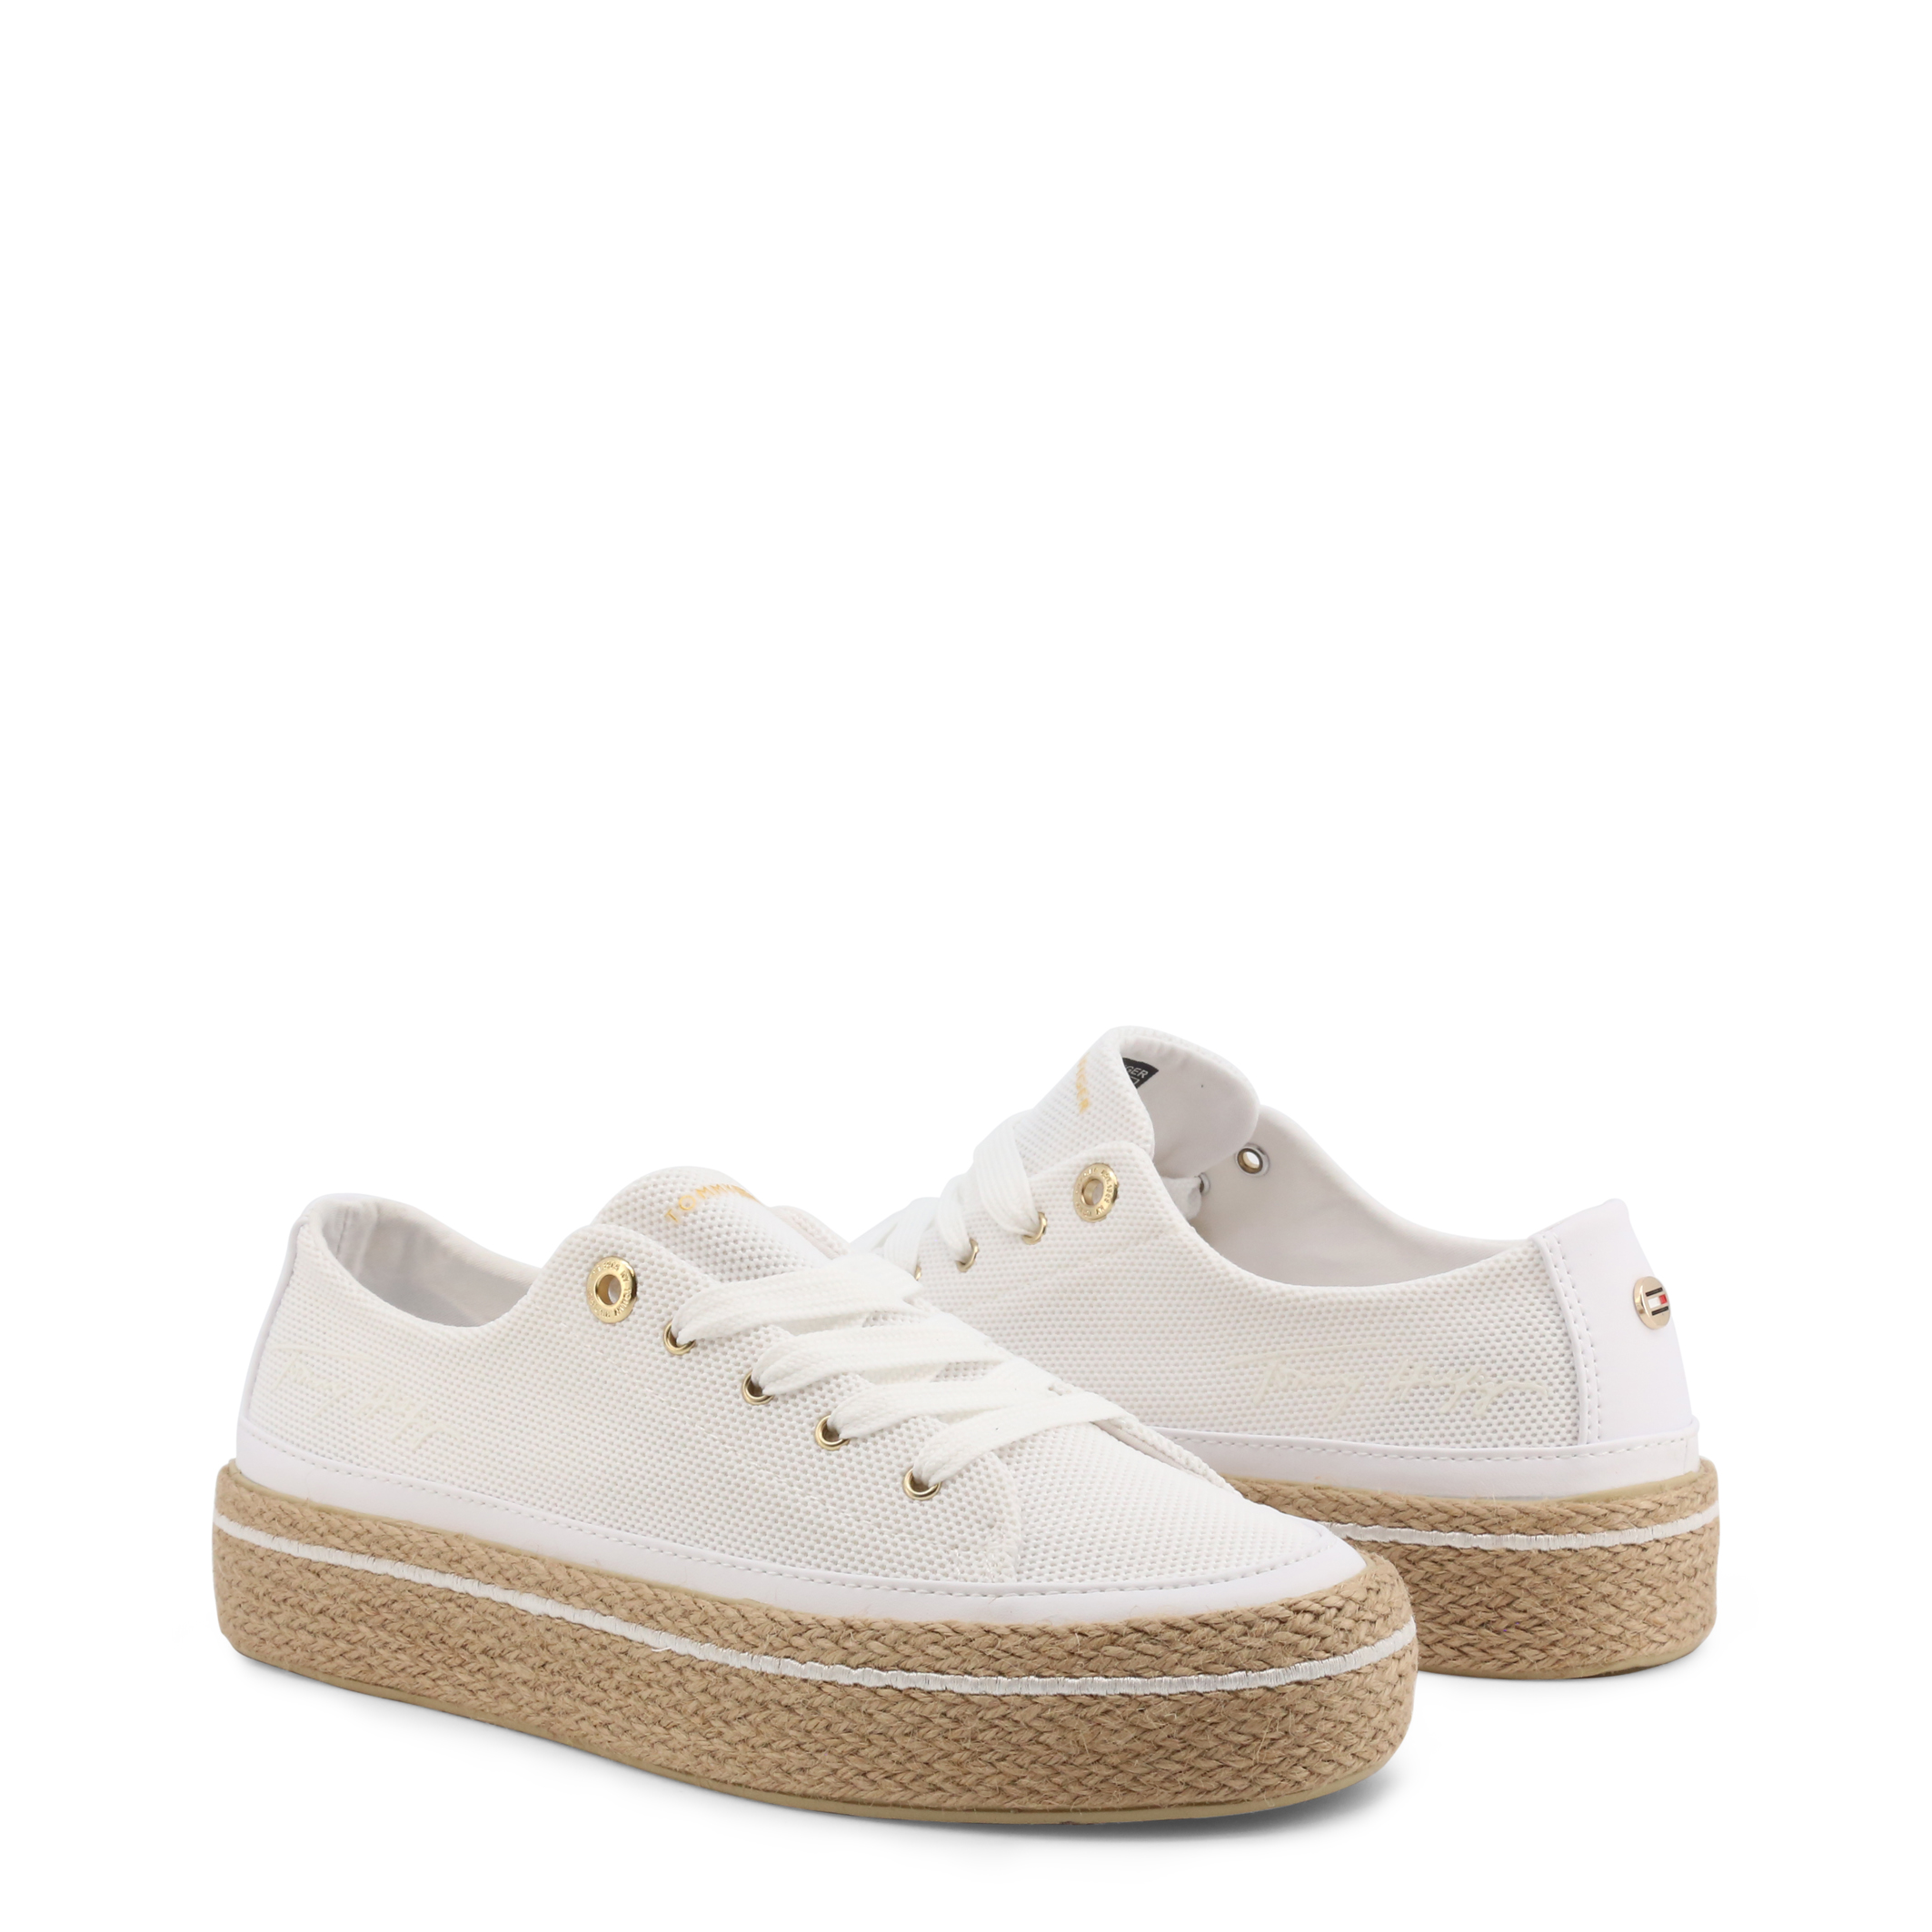 Tommy Hilfiger White Sneakers for Women - FW0FW05734